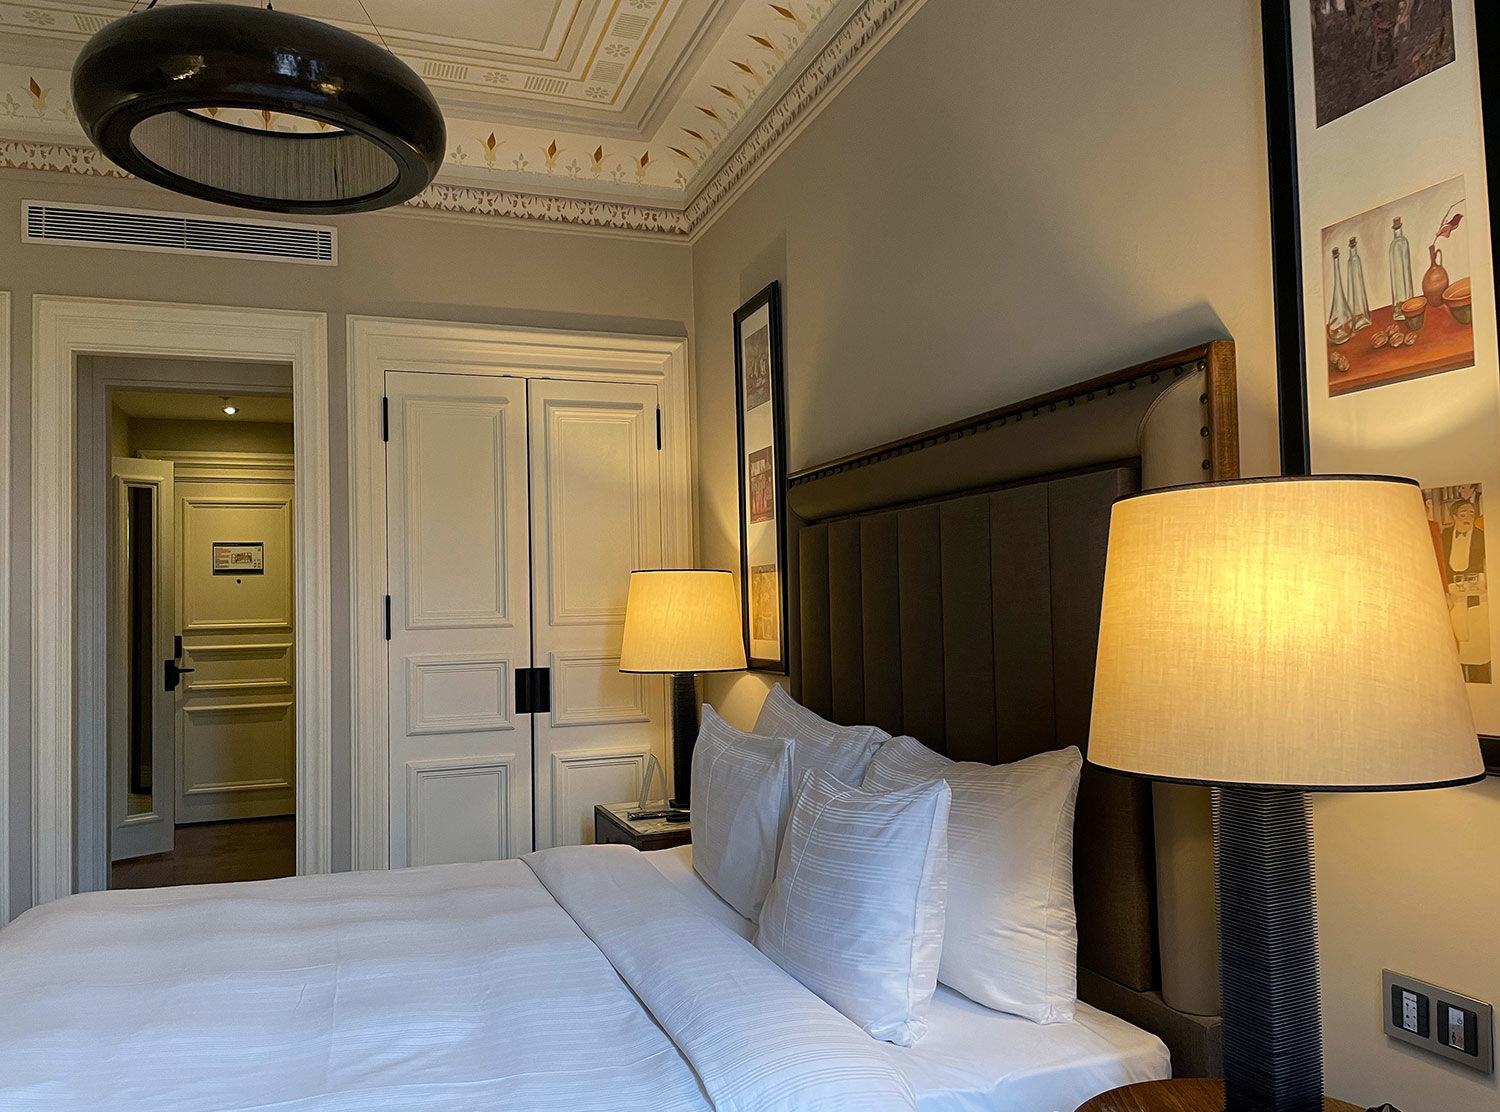 The Bank Hotel Istanbul Aaaah, chic room with a soaring ceiling, calm, luxurious and old world sophisticated air